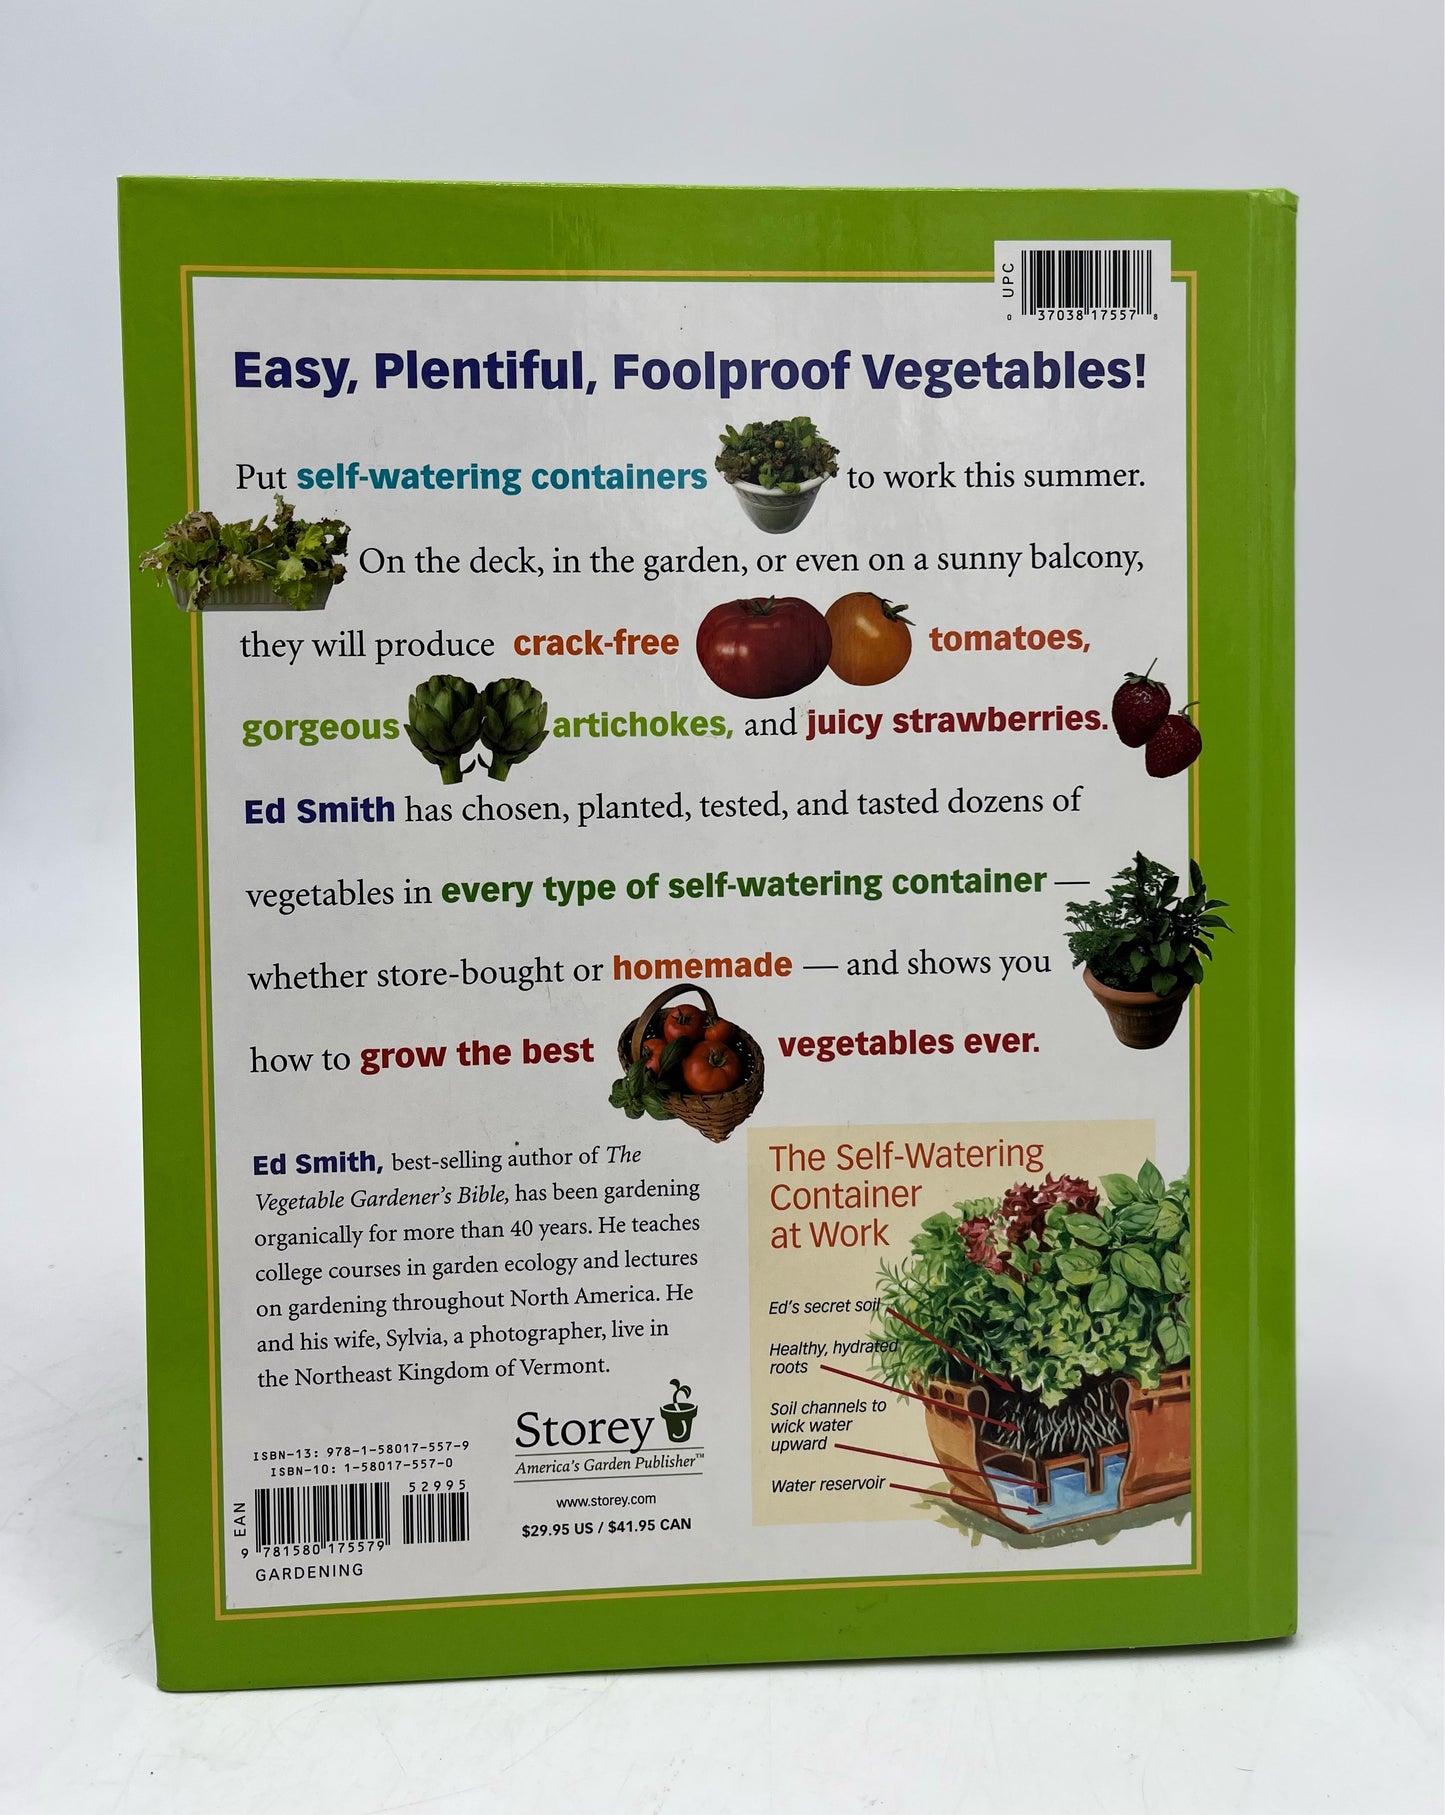 Incredible Vegetables from Self-Watering Containers - Edward C. Smith